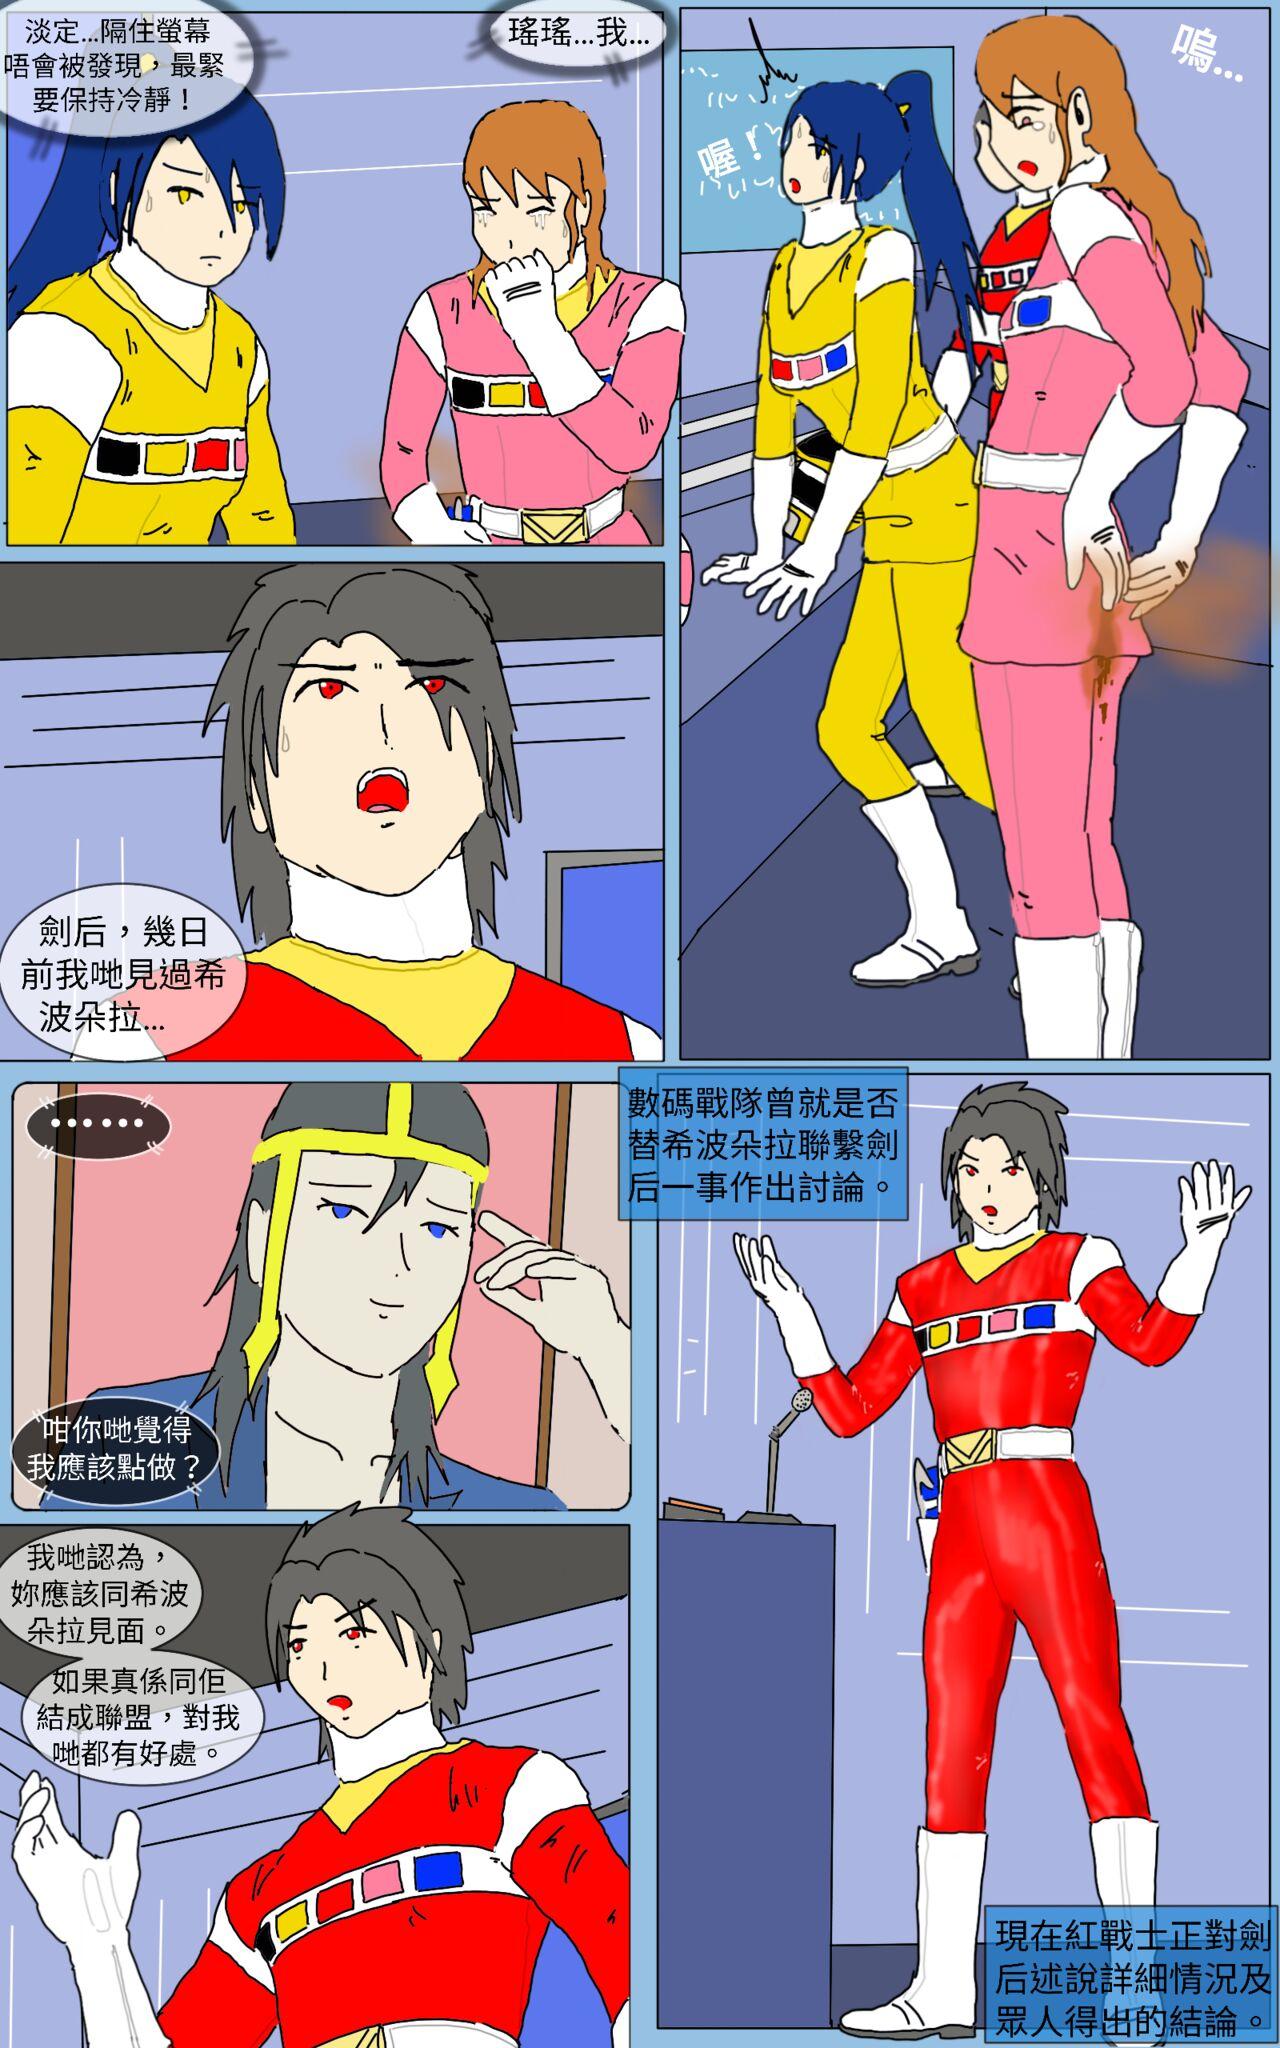 Tied Mission 16 - Super sentai High Heels - Picture 3